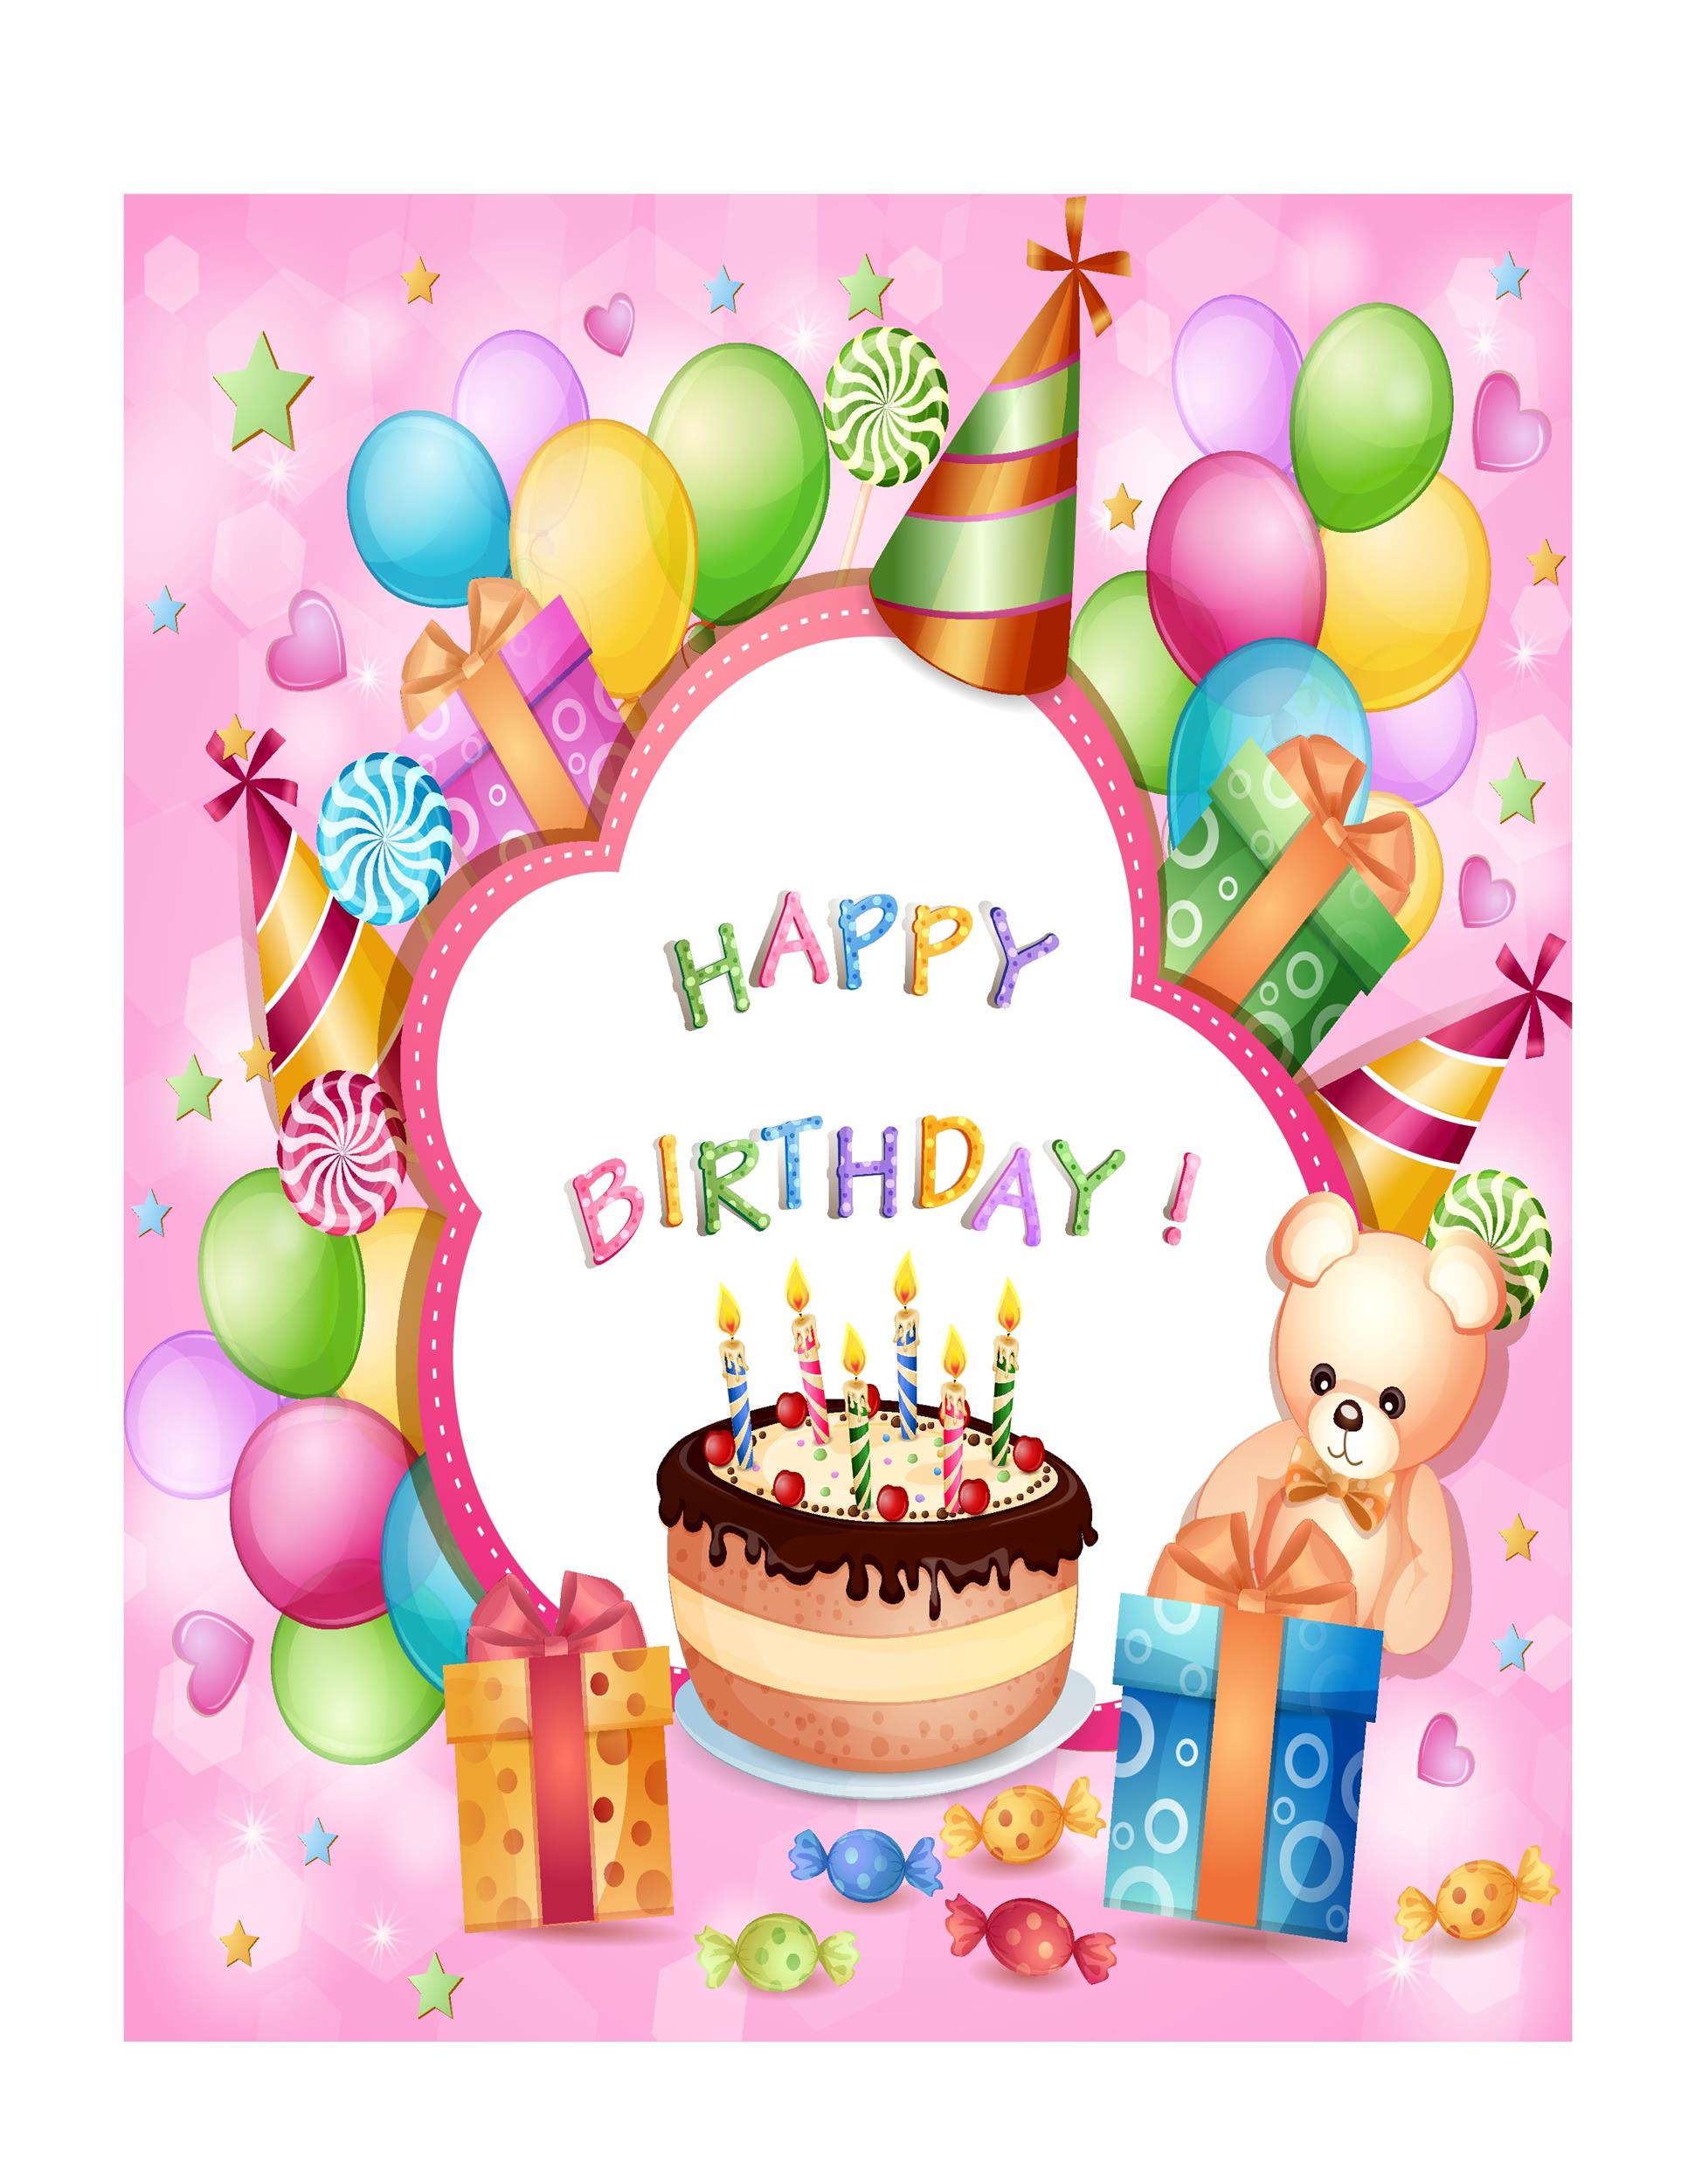 Birthday Card Psd Template Free Download Zoqatools